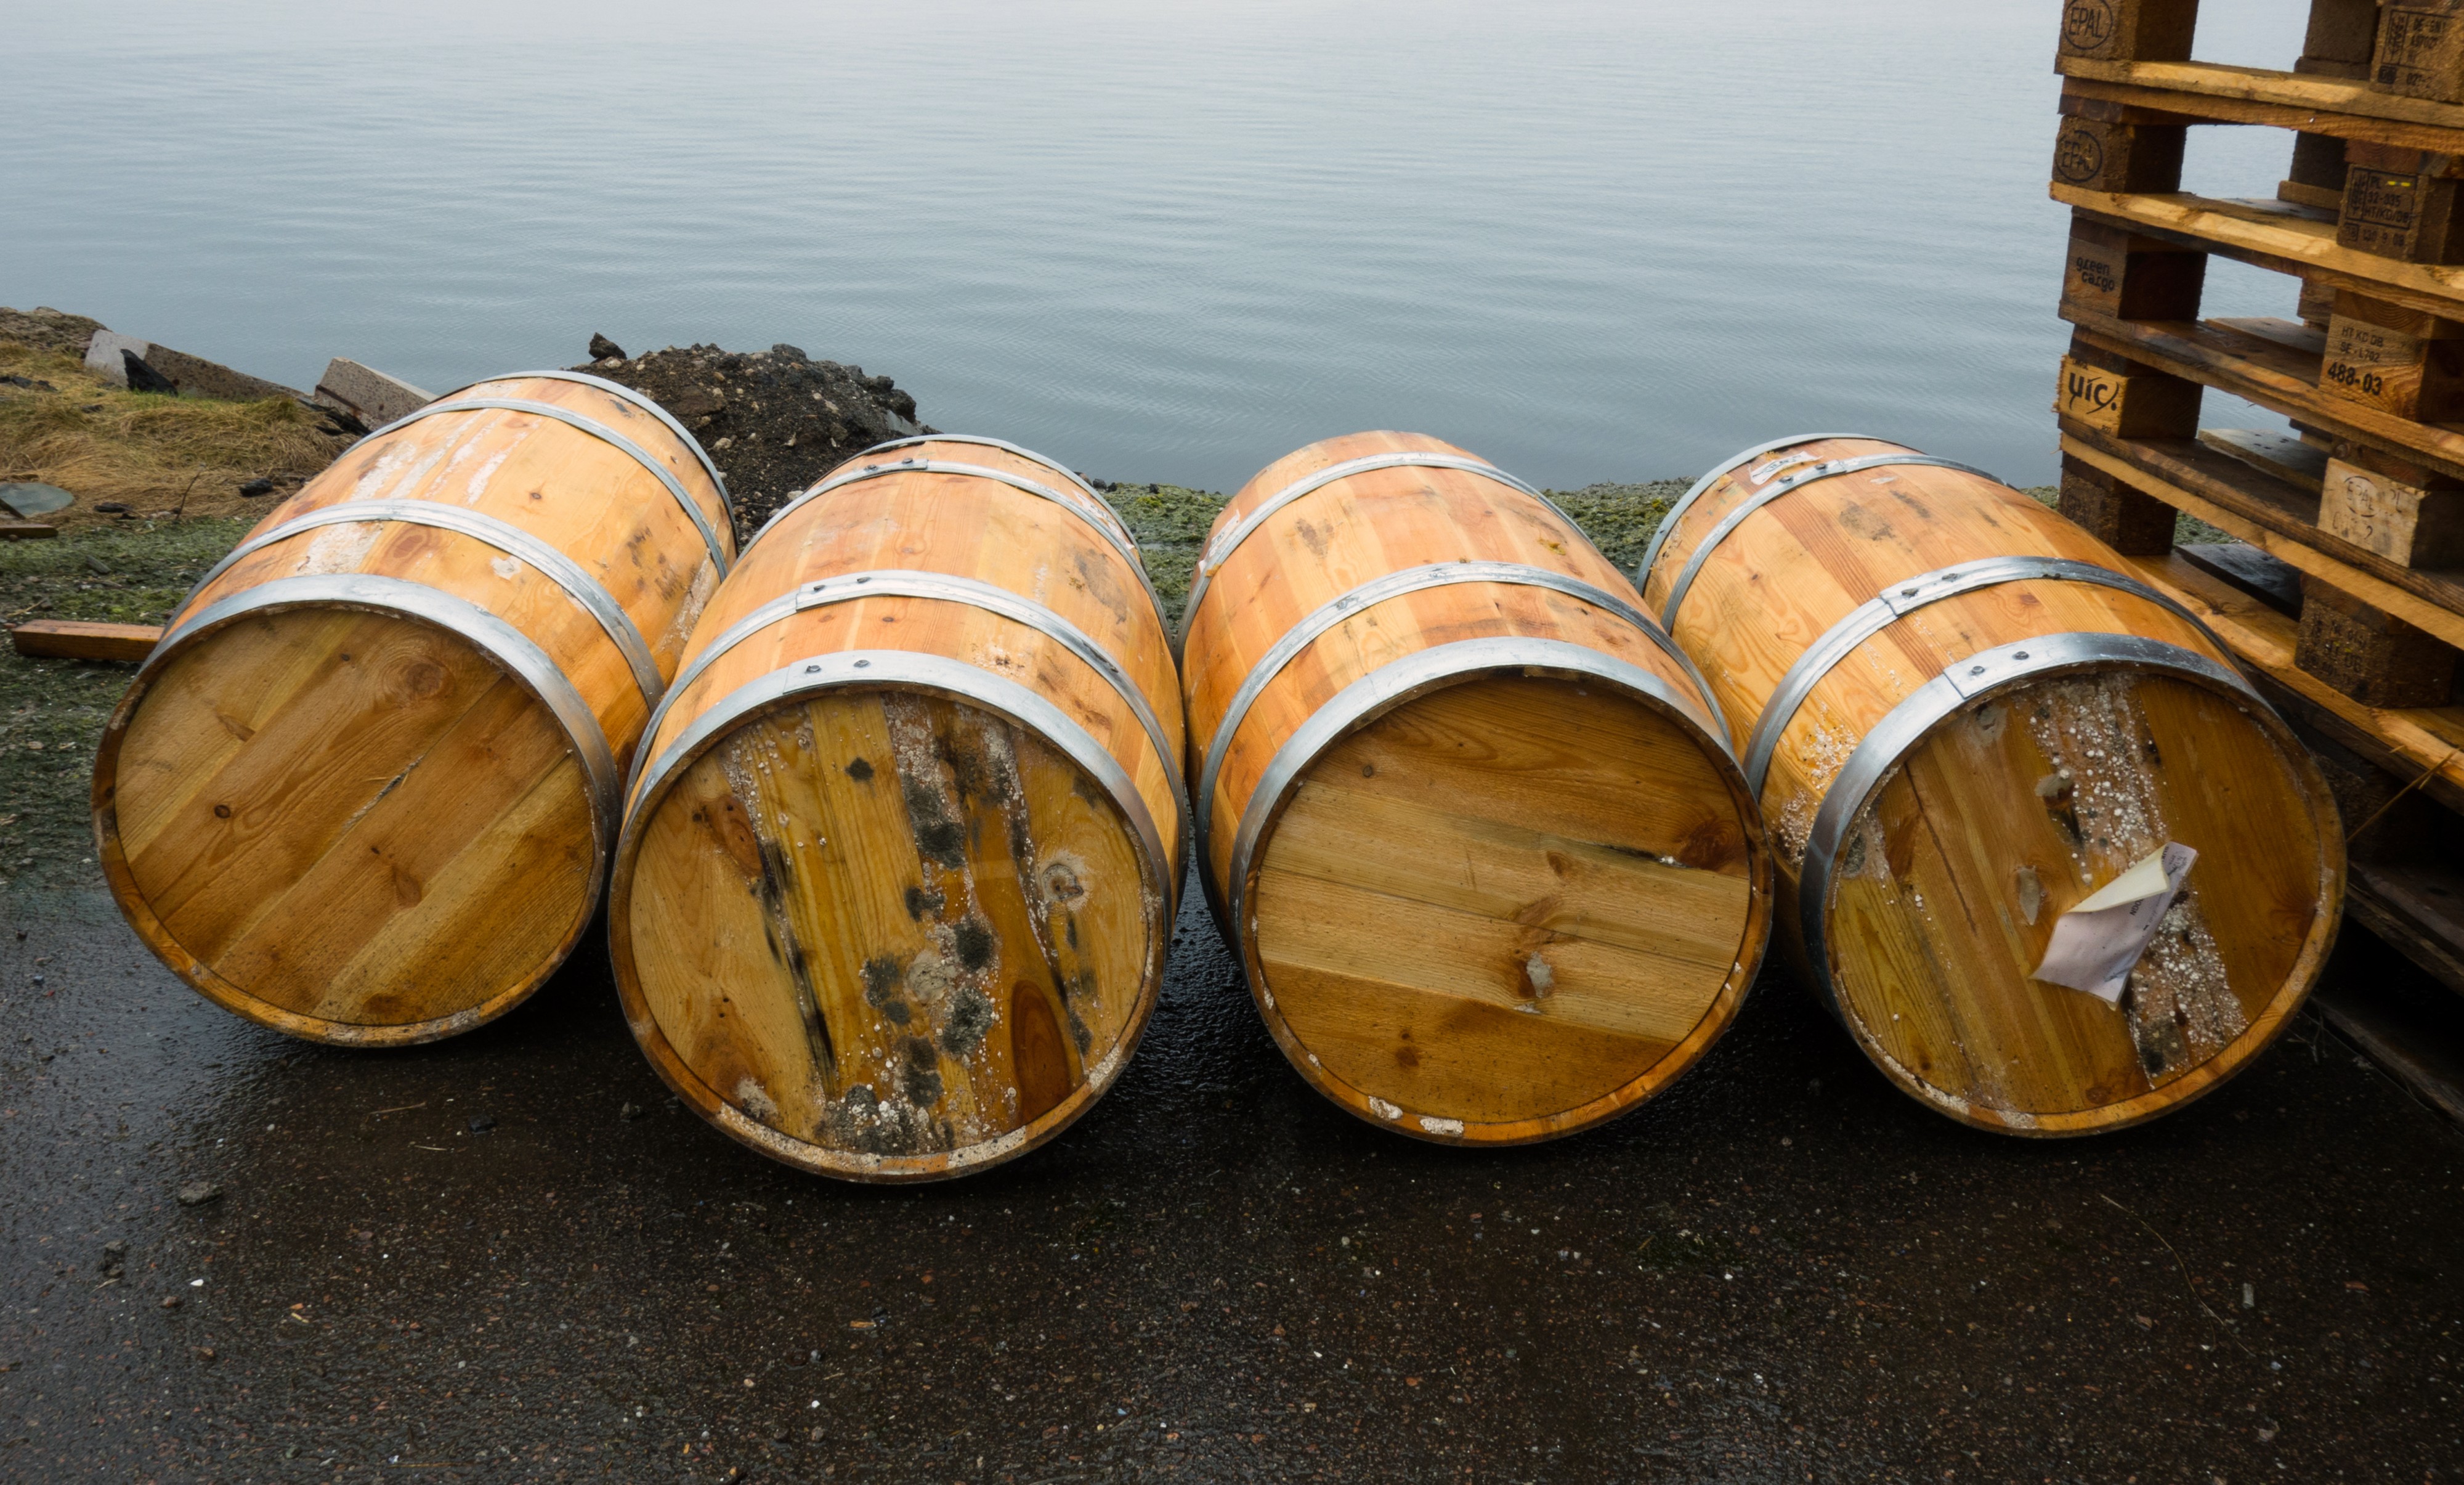 Four barrels by the sea